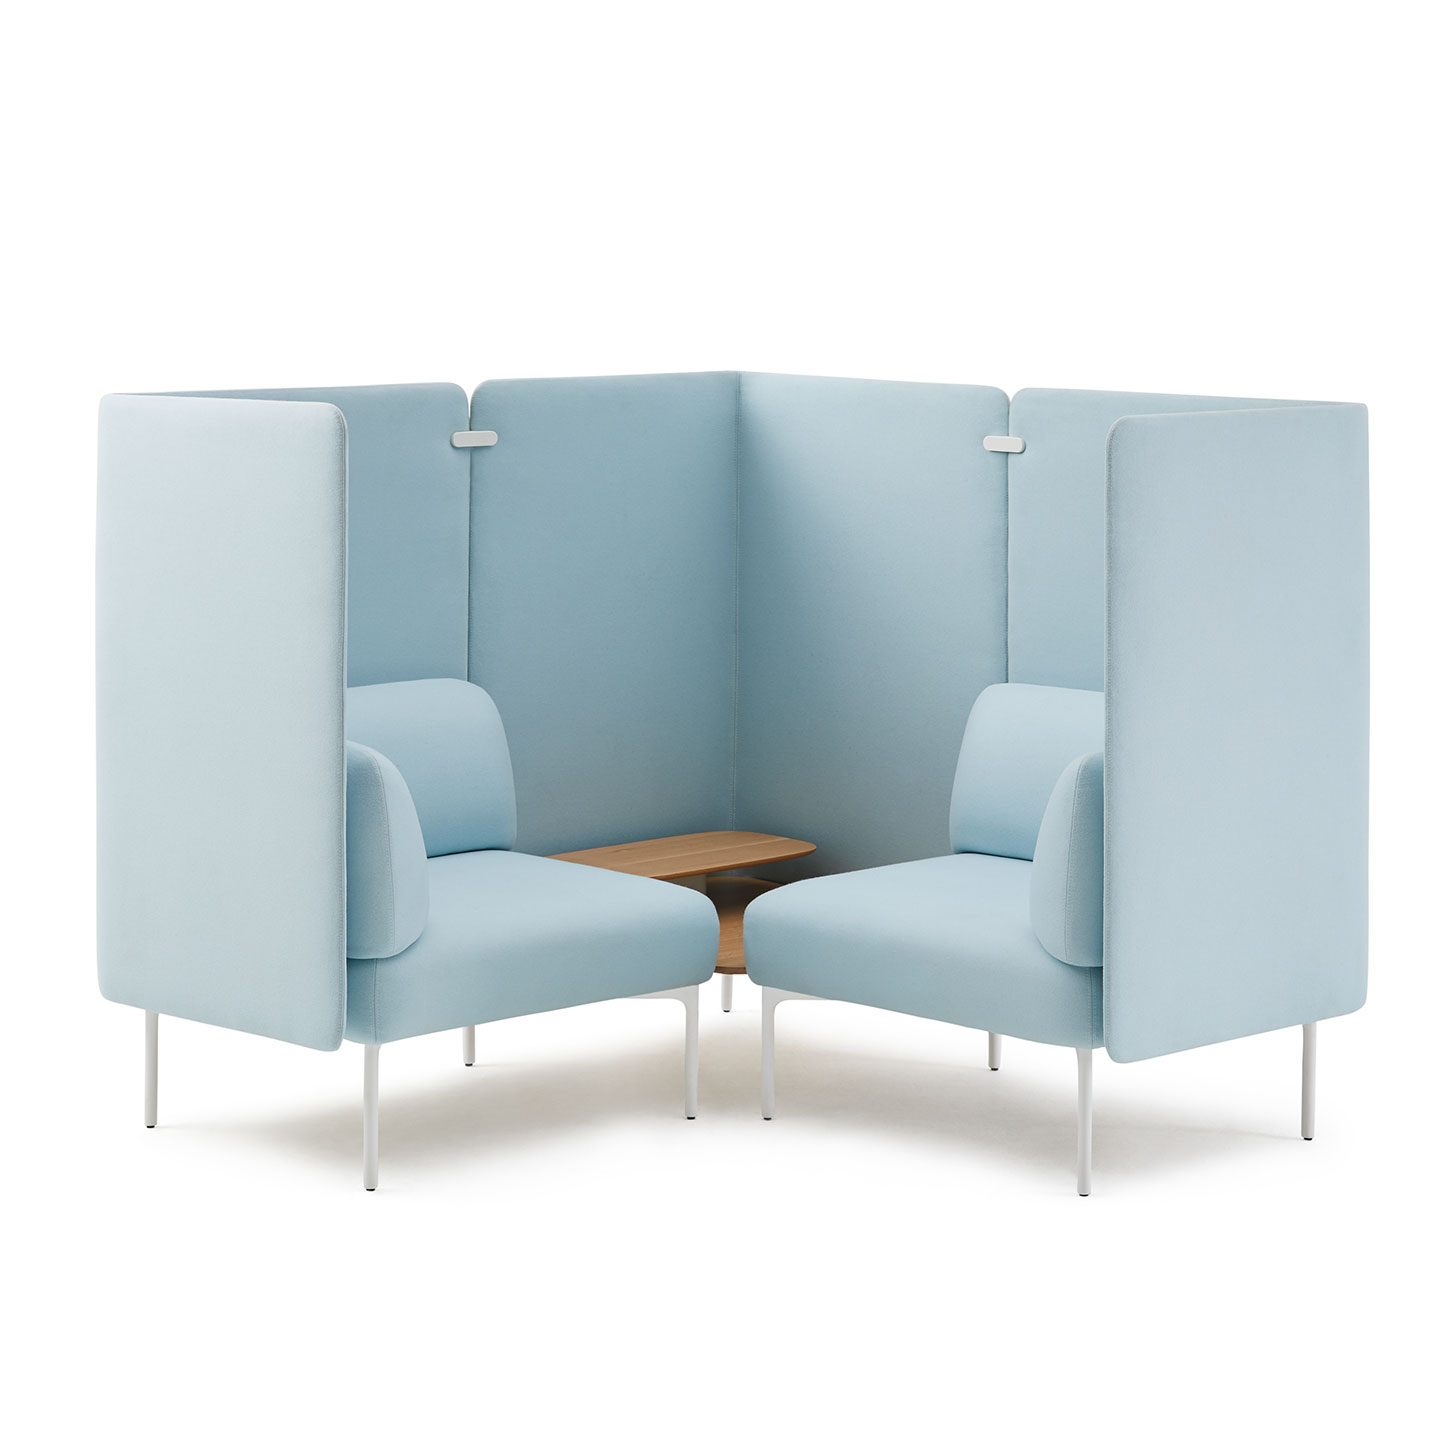 Haworth Cabana Lounge in light blue with side wood table and tall blue divider around booth